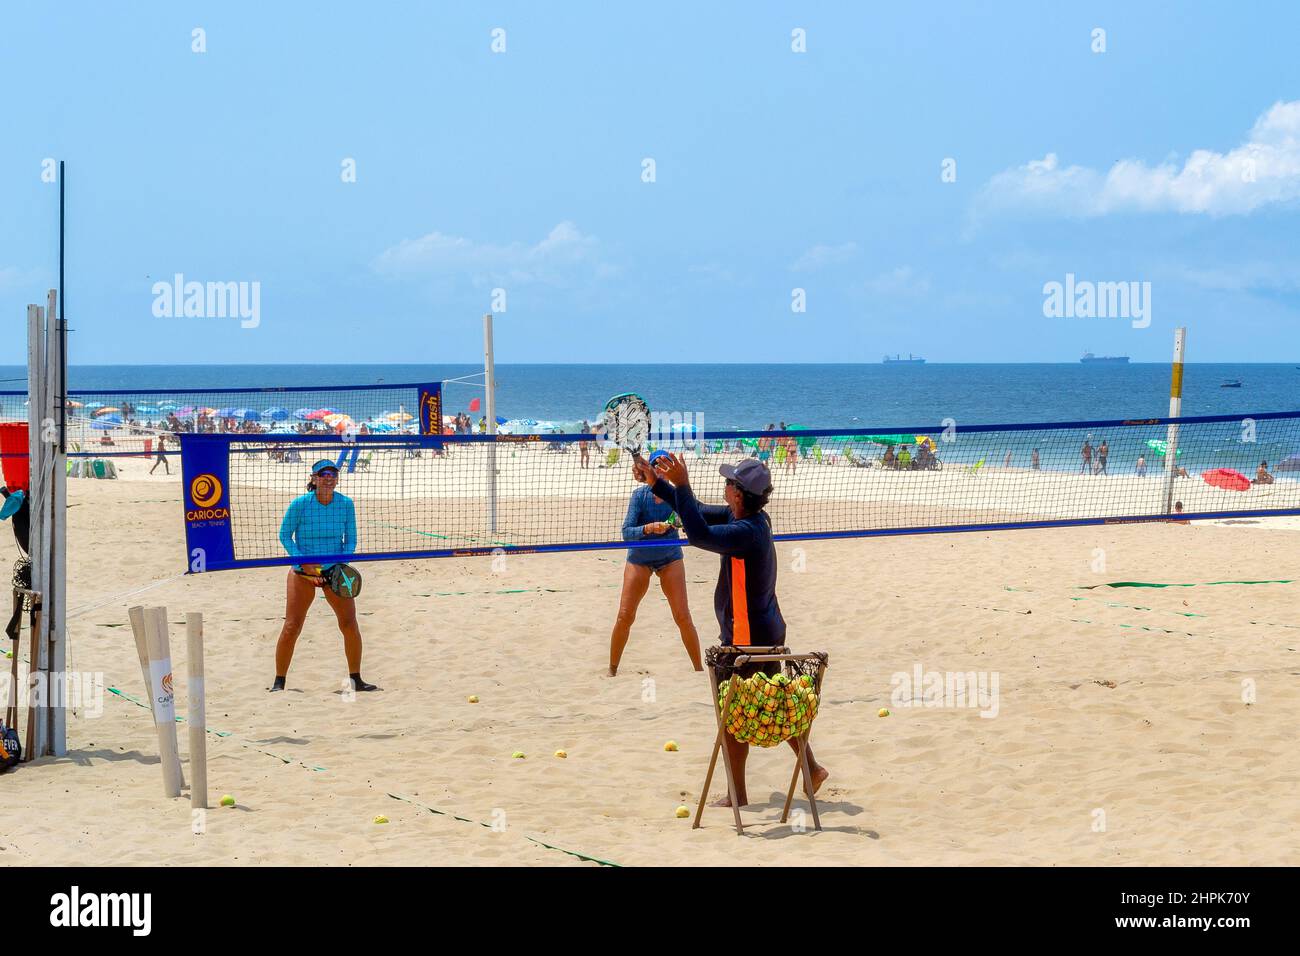 People playing sport in a net set in the sand. Ipanema Beach is a famous place and a major travel destination in the South American country. Stock Photo